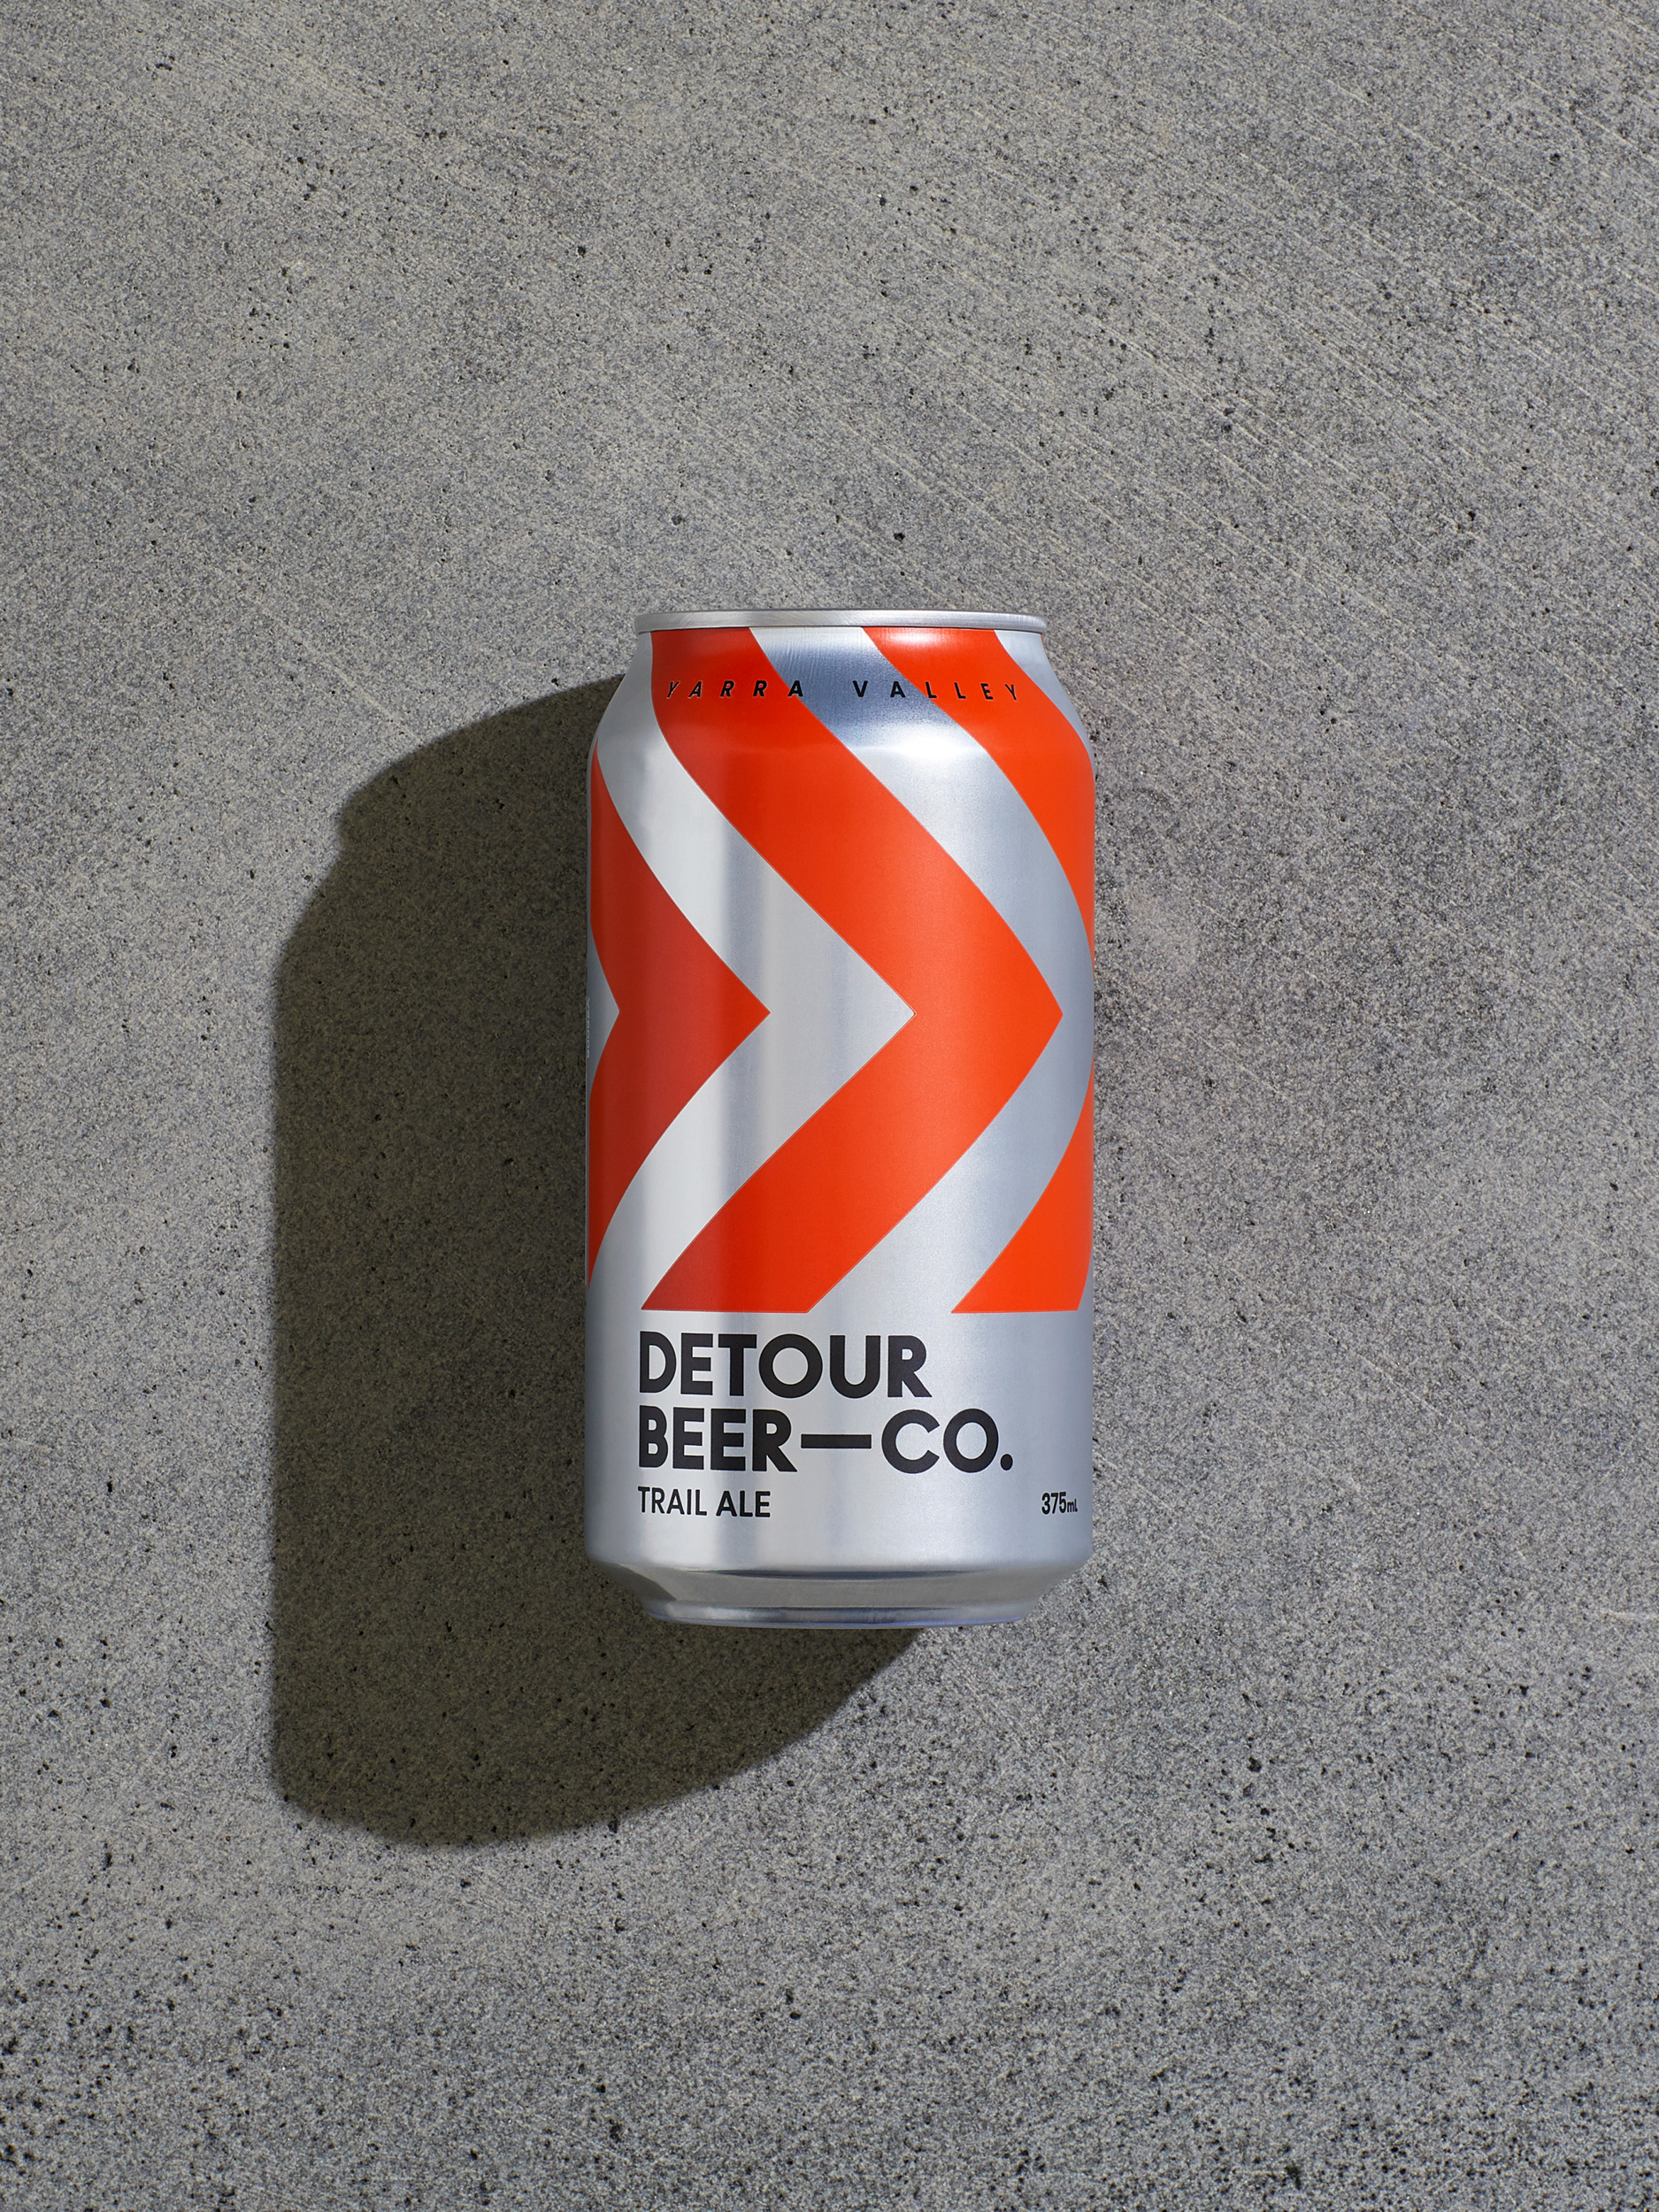 Logotype and packaging design by Weave for Australian craft beer business Detour Beer Co. Reviewed on by Richard Baird